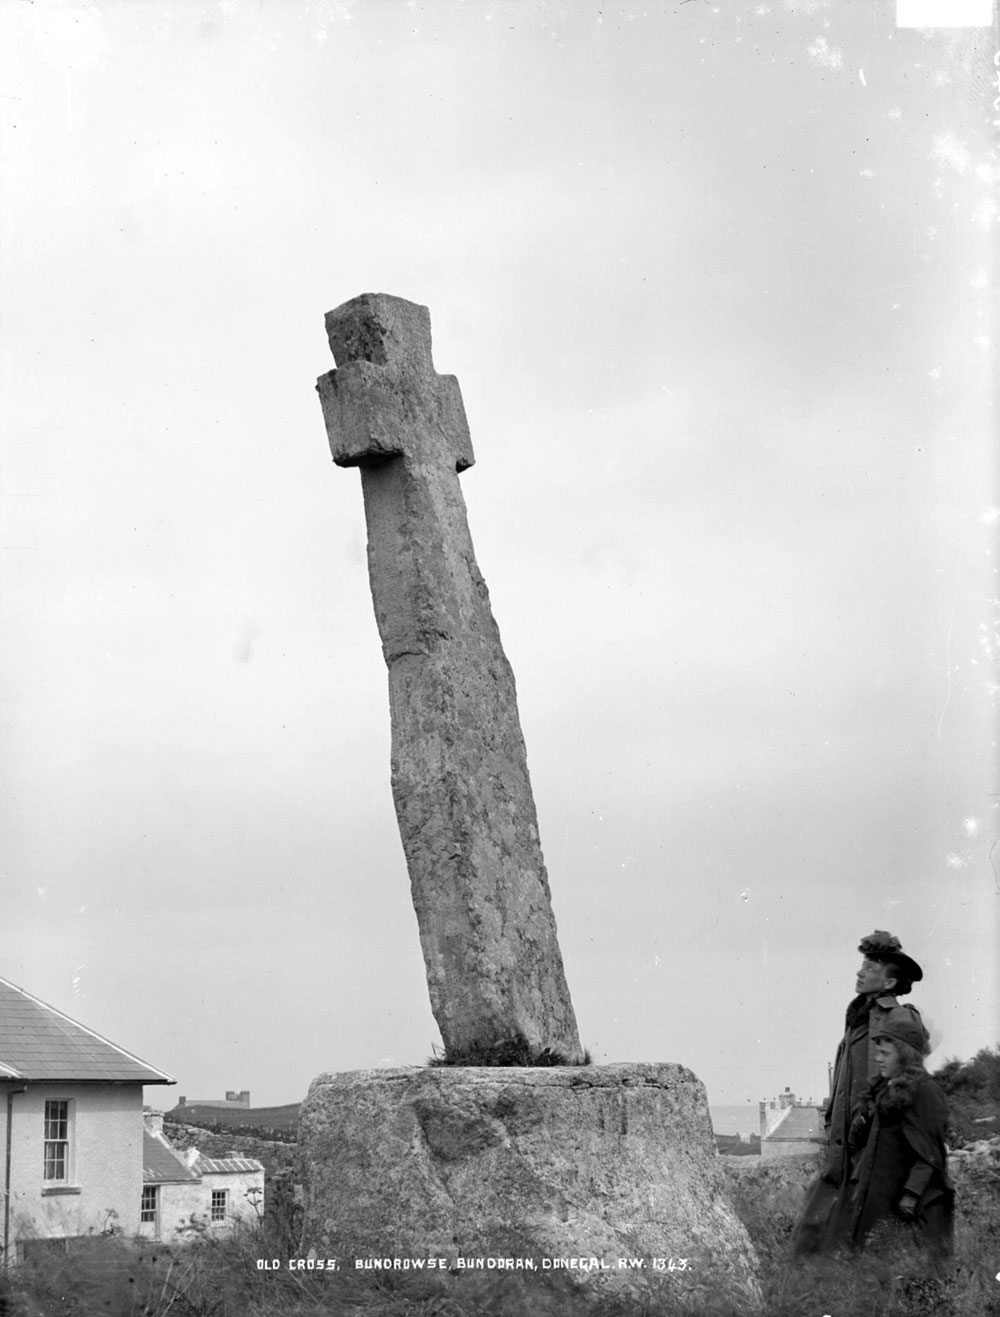 Tullaghan cross, County Leitrim. Photograph by Robert Welch, © NMNI.